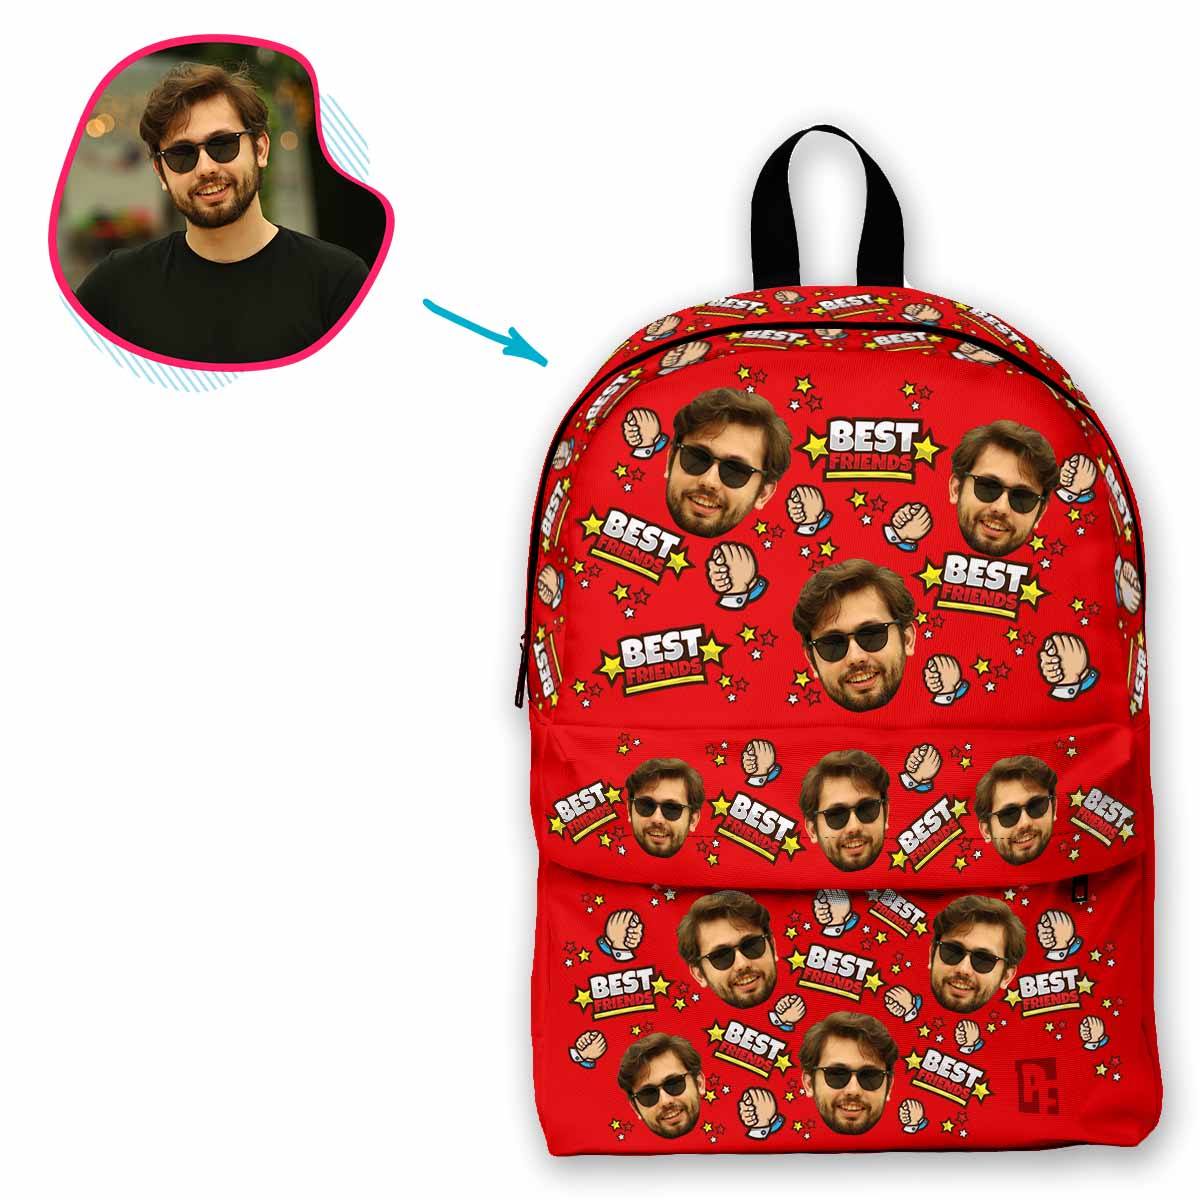 red Best Friends classic backpack personalized with photo of face printed on it